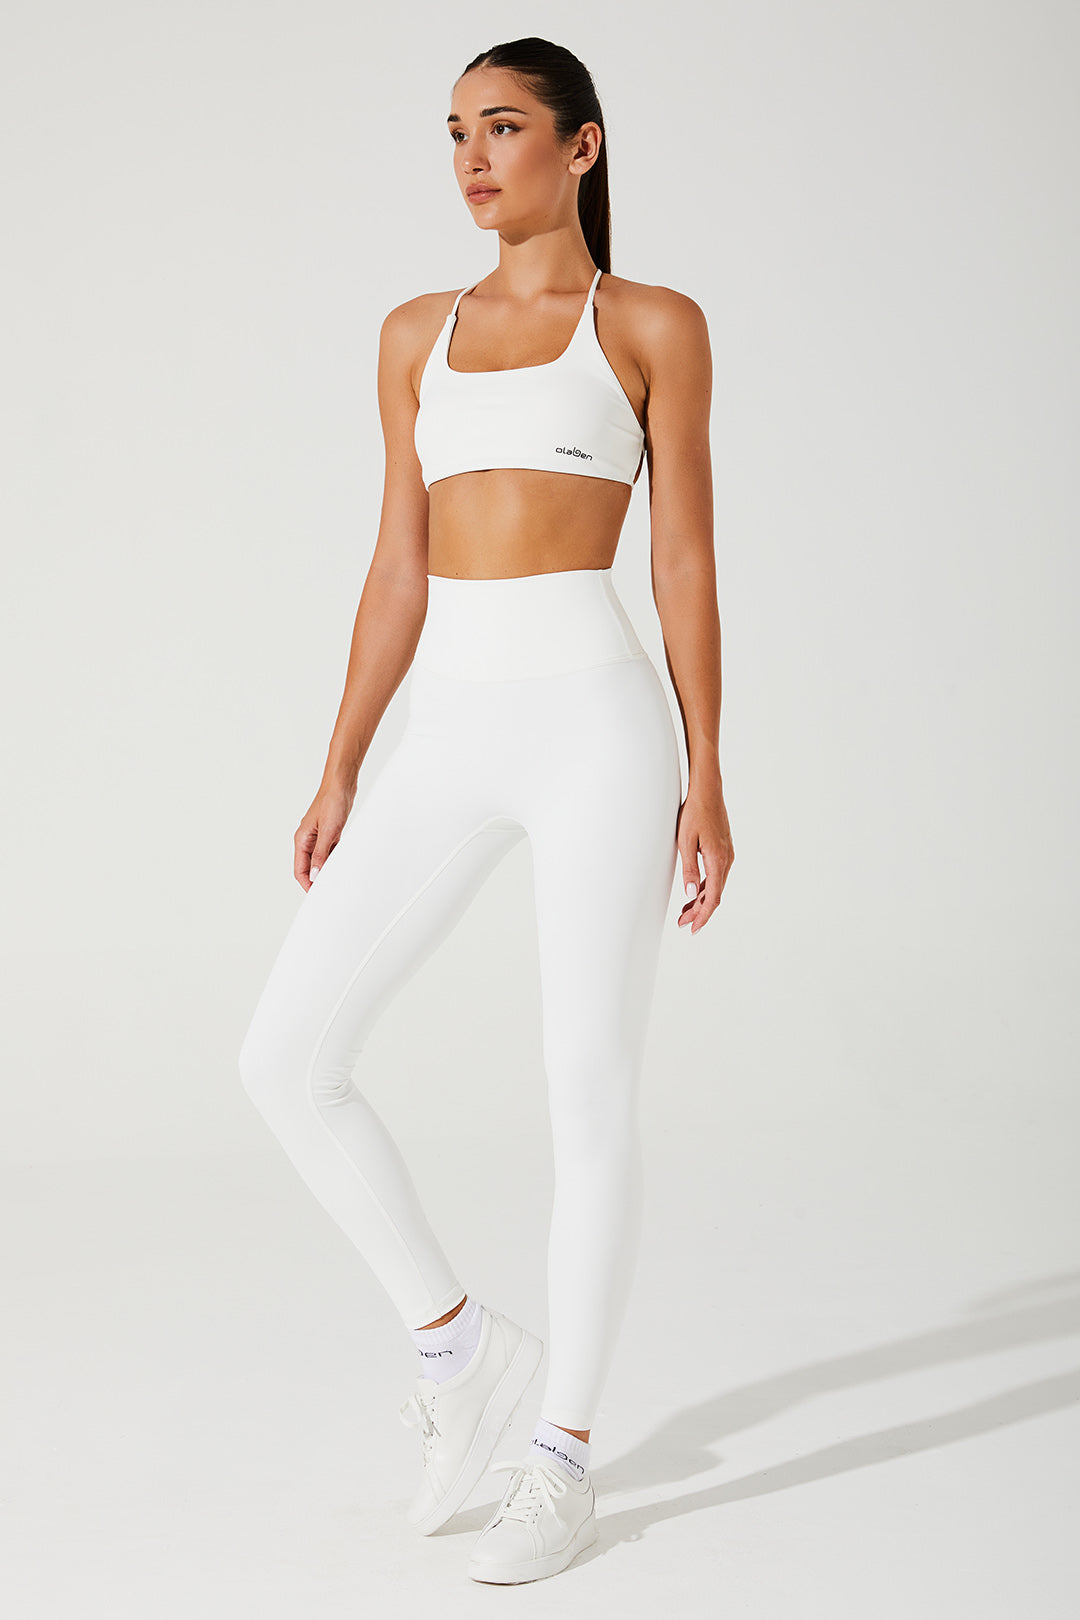 White women's leggings with a stylish design, perfect for any casual or athletic outfit.